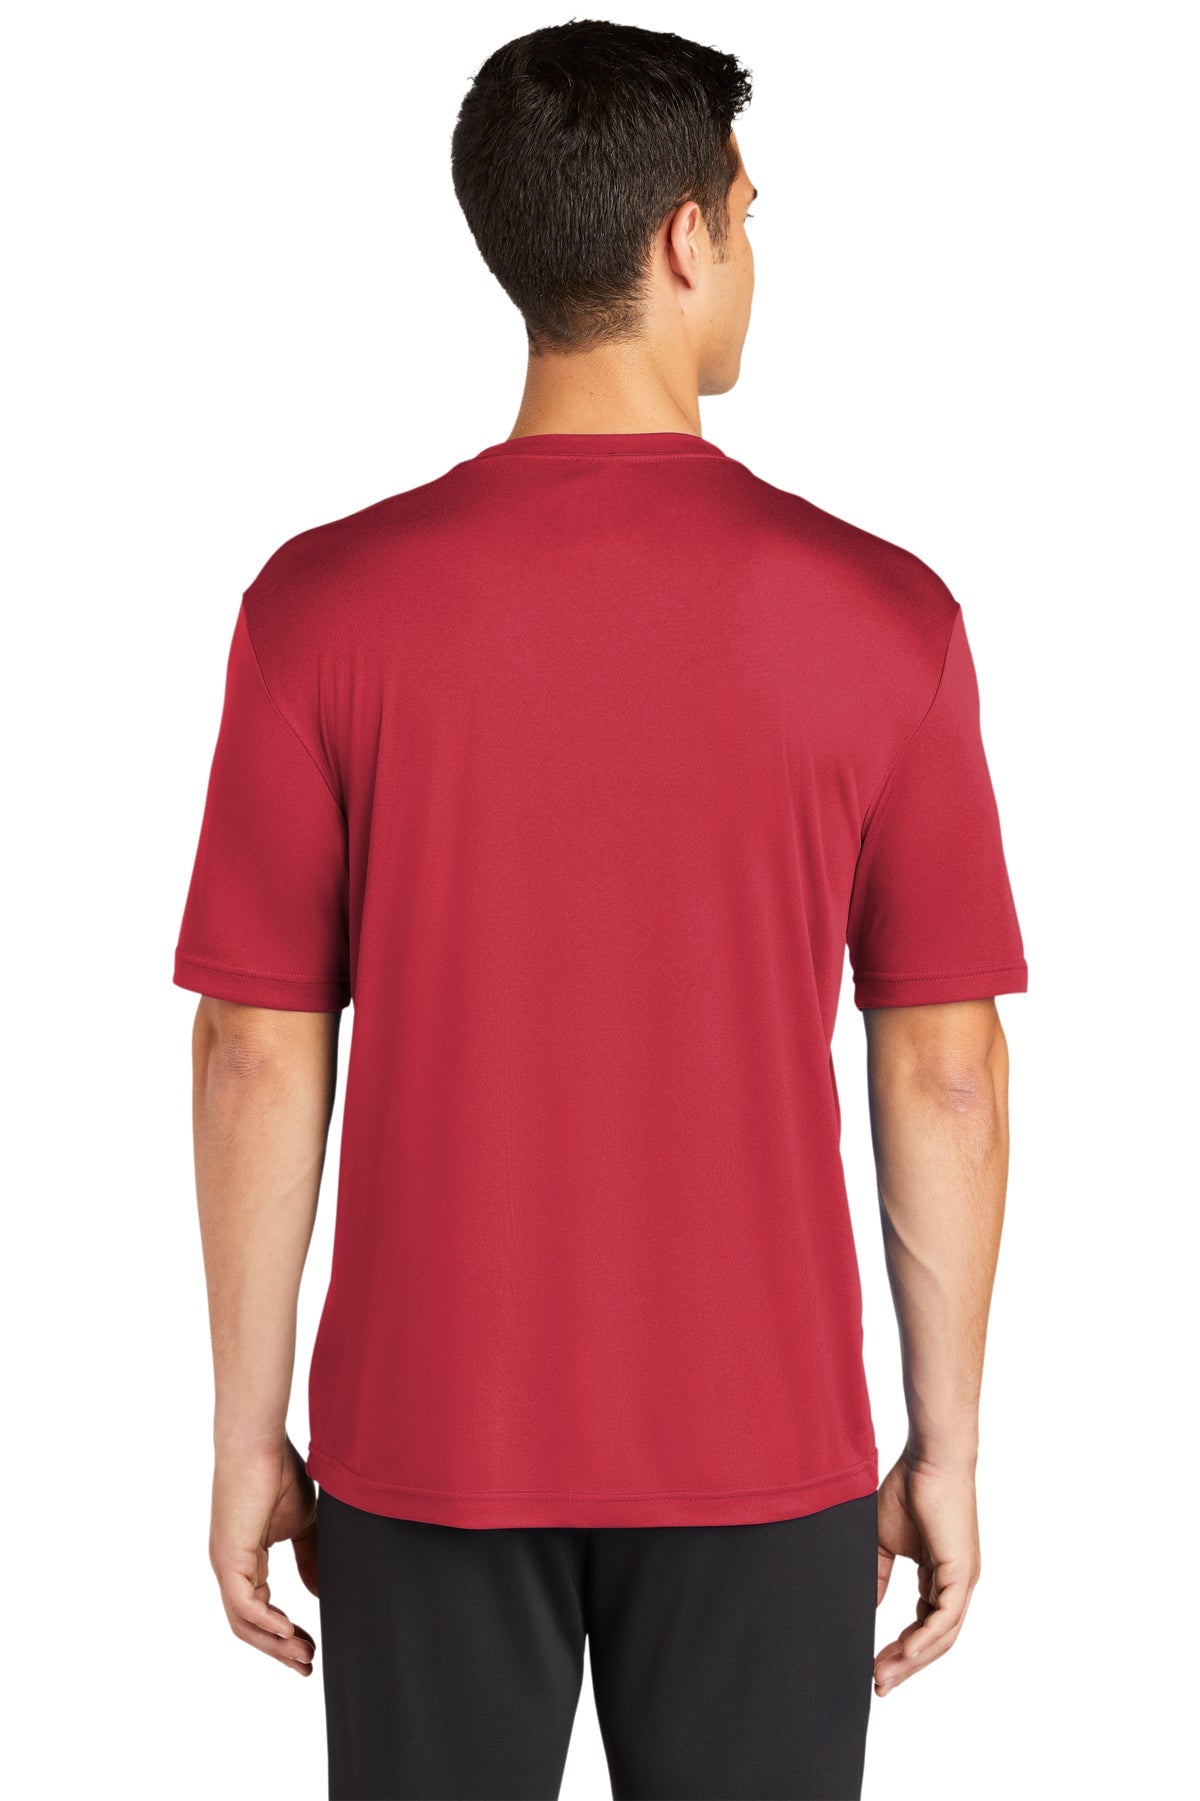 Sport-Tek Tall PosiCharge Branded Competitor Tee's, True Red